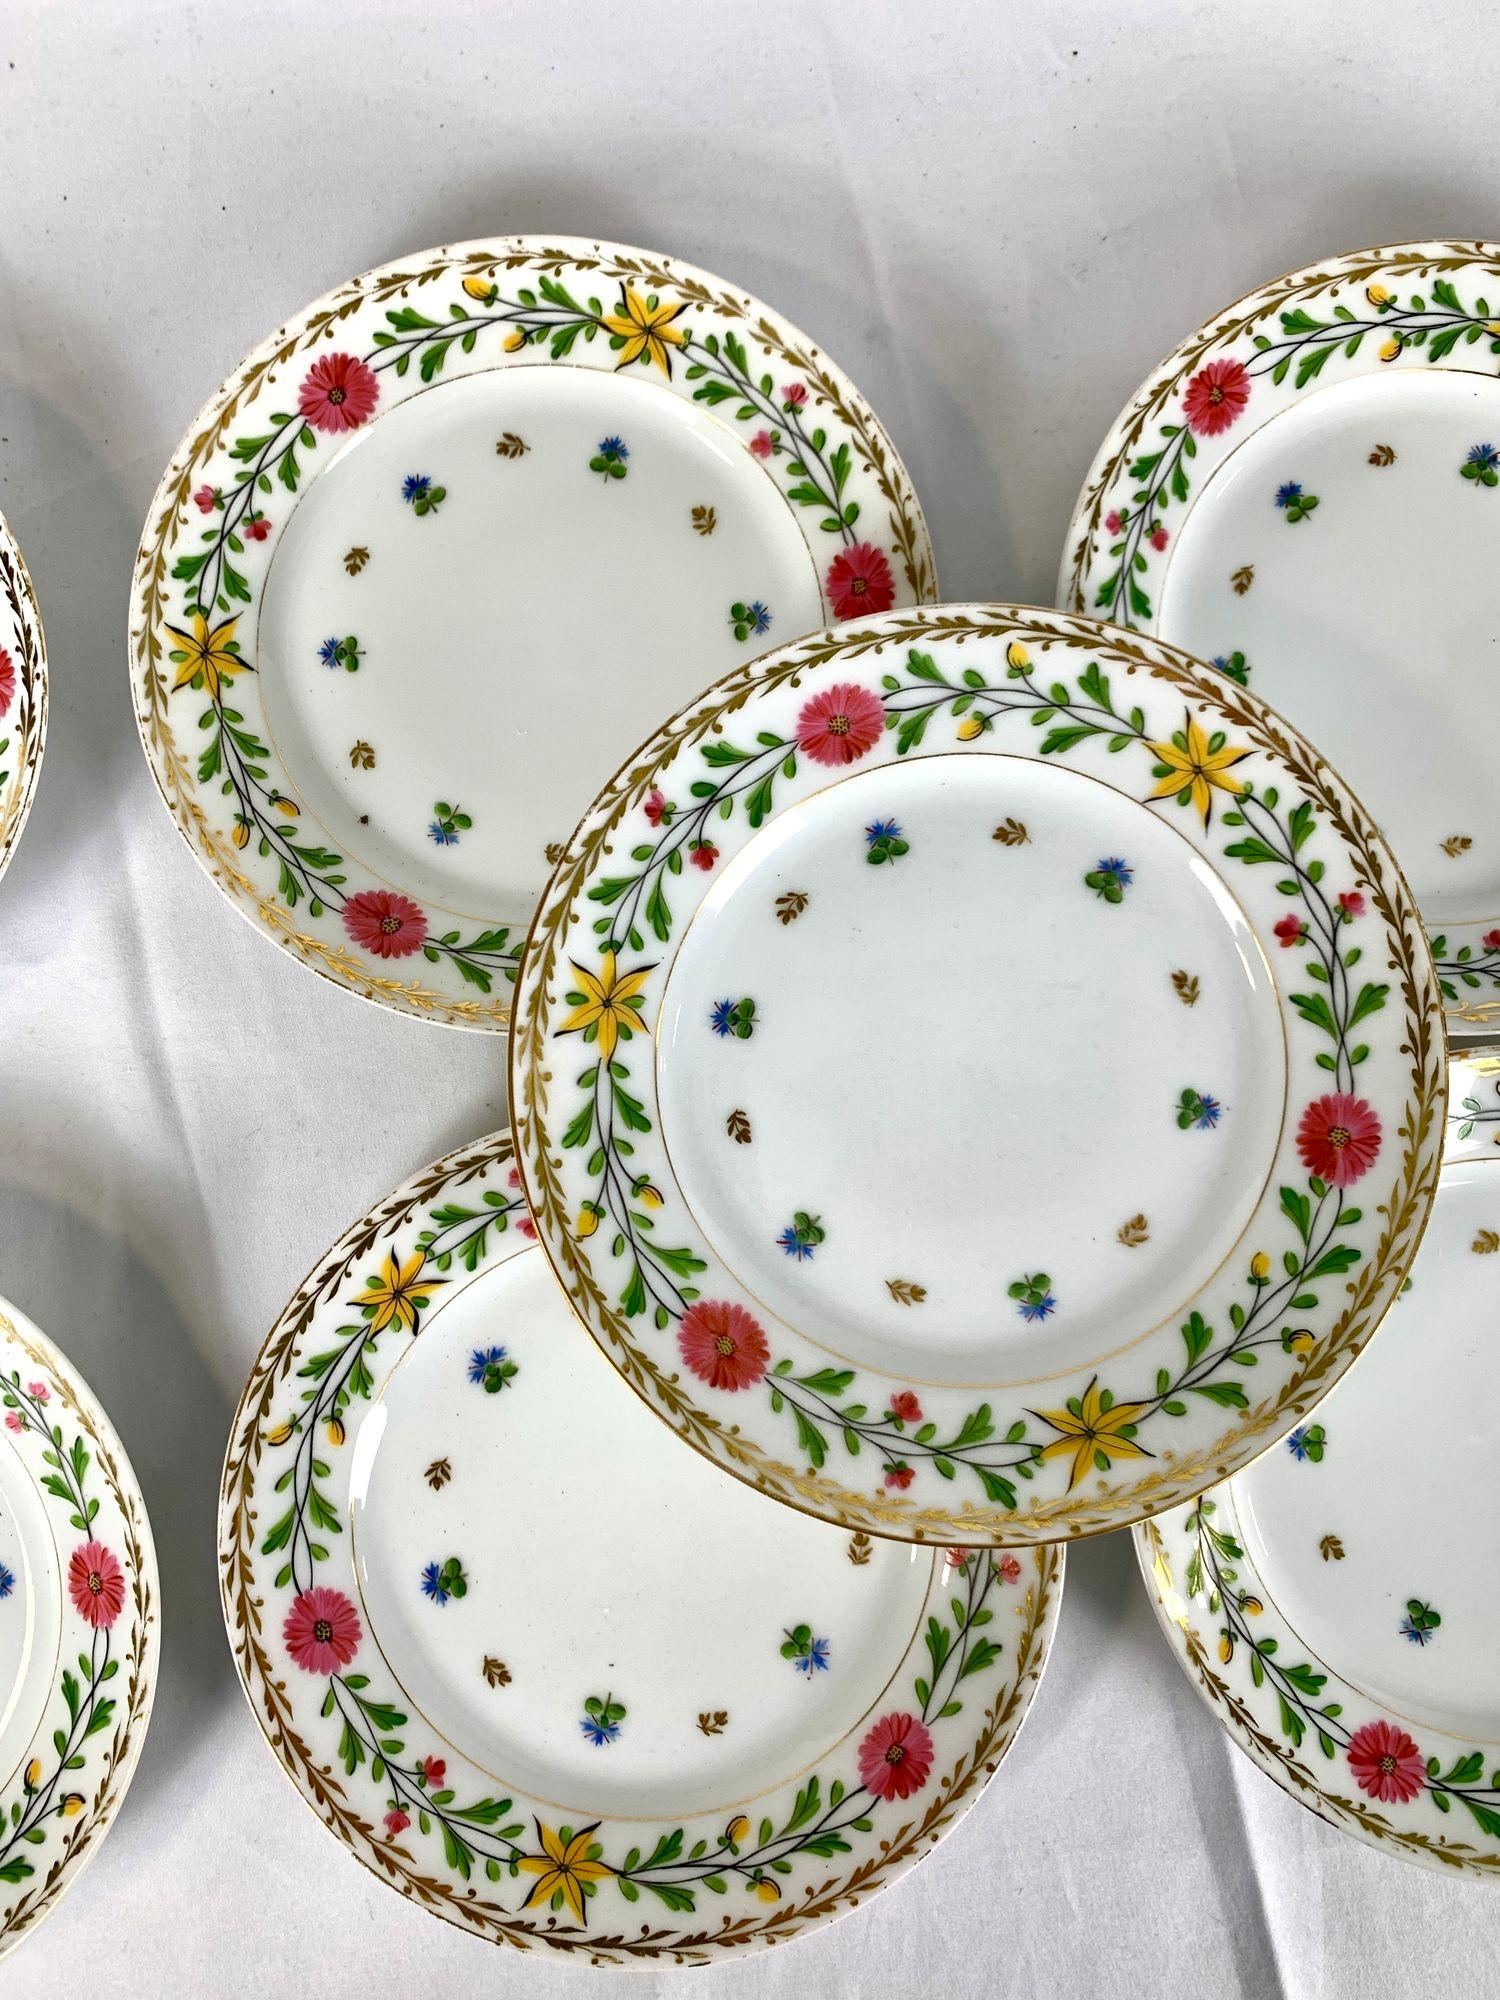 Set of Nine Haviland Limoges Vieux Paris Dessert Dishes France Circa 1876 In Good Condition For Sale In Katonah, NY